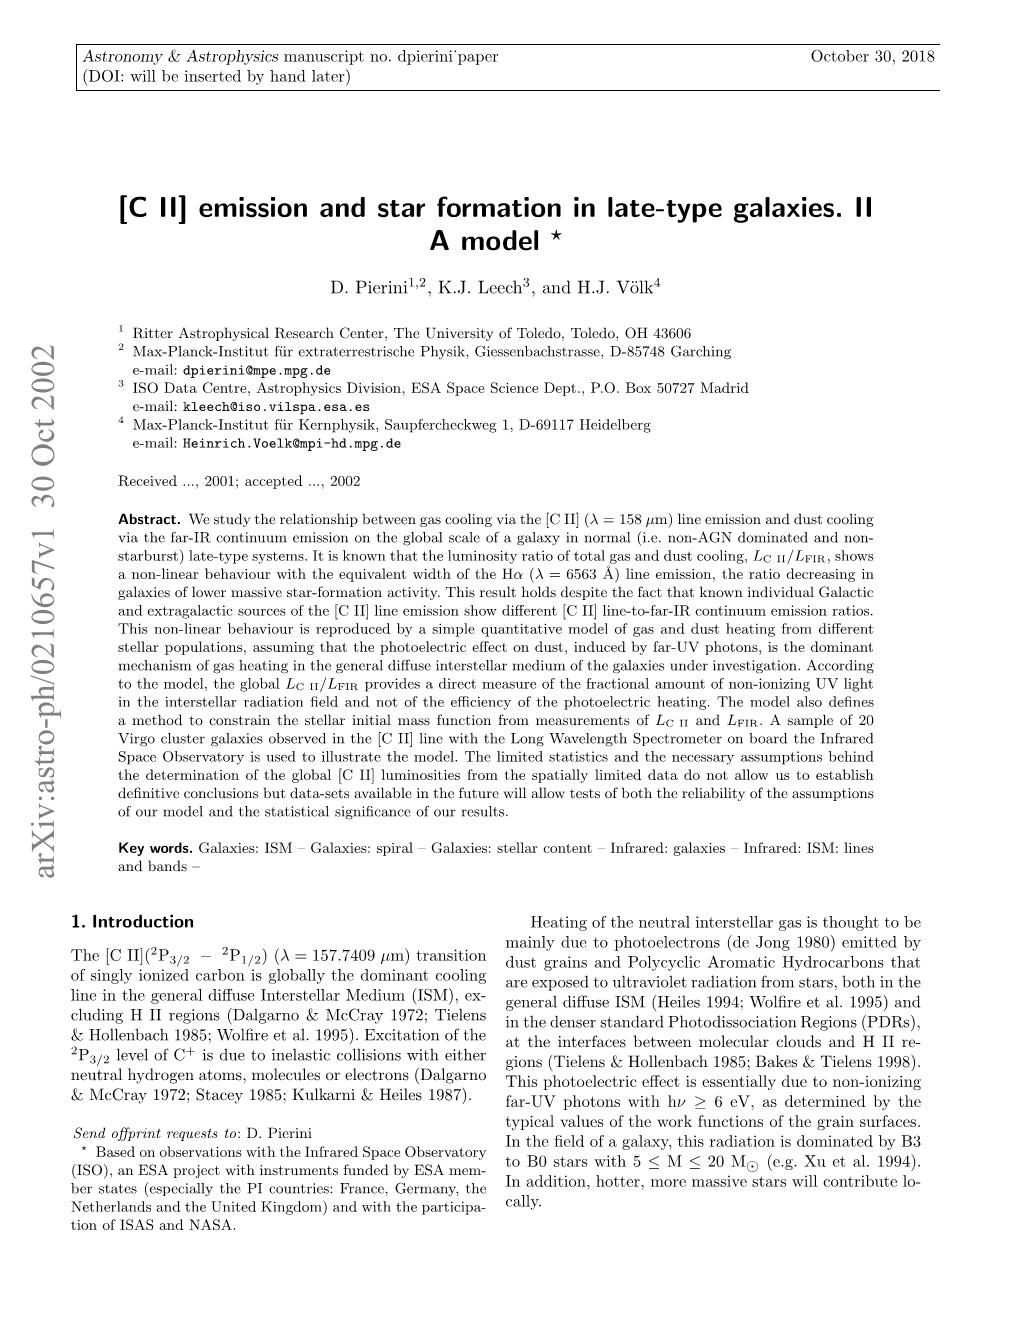 [C II] Emission and Star Formation in Late-Type Galaxies. II a Model